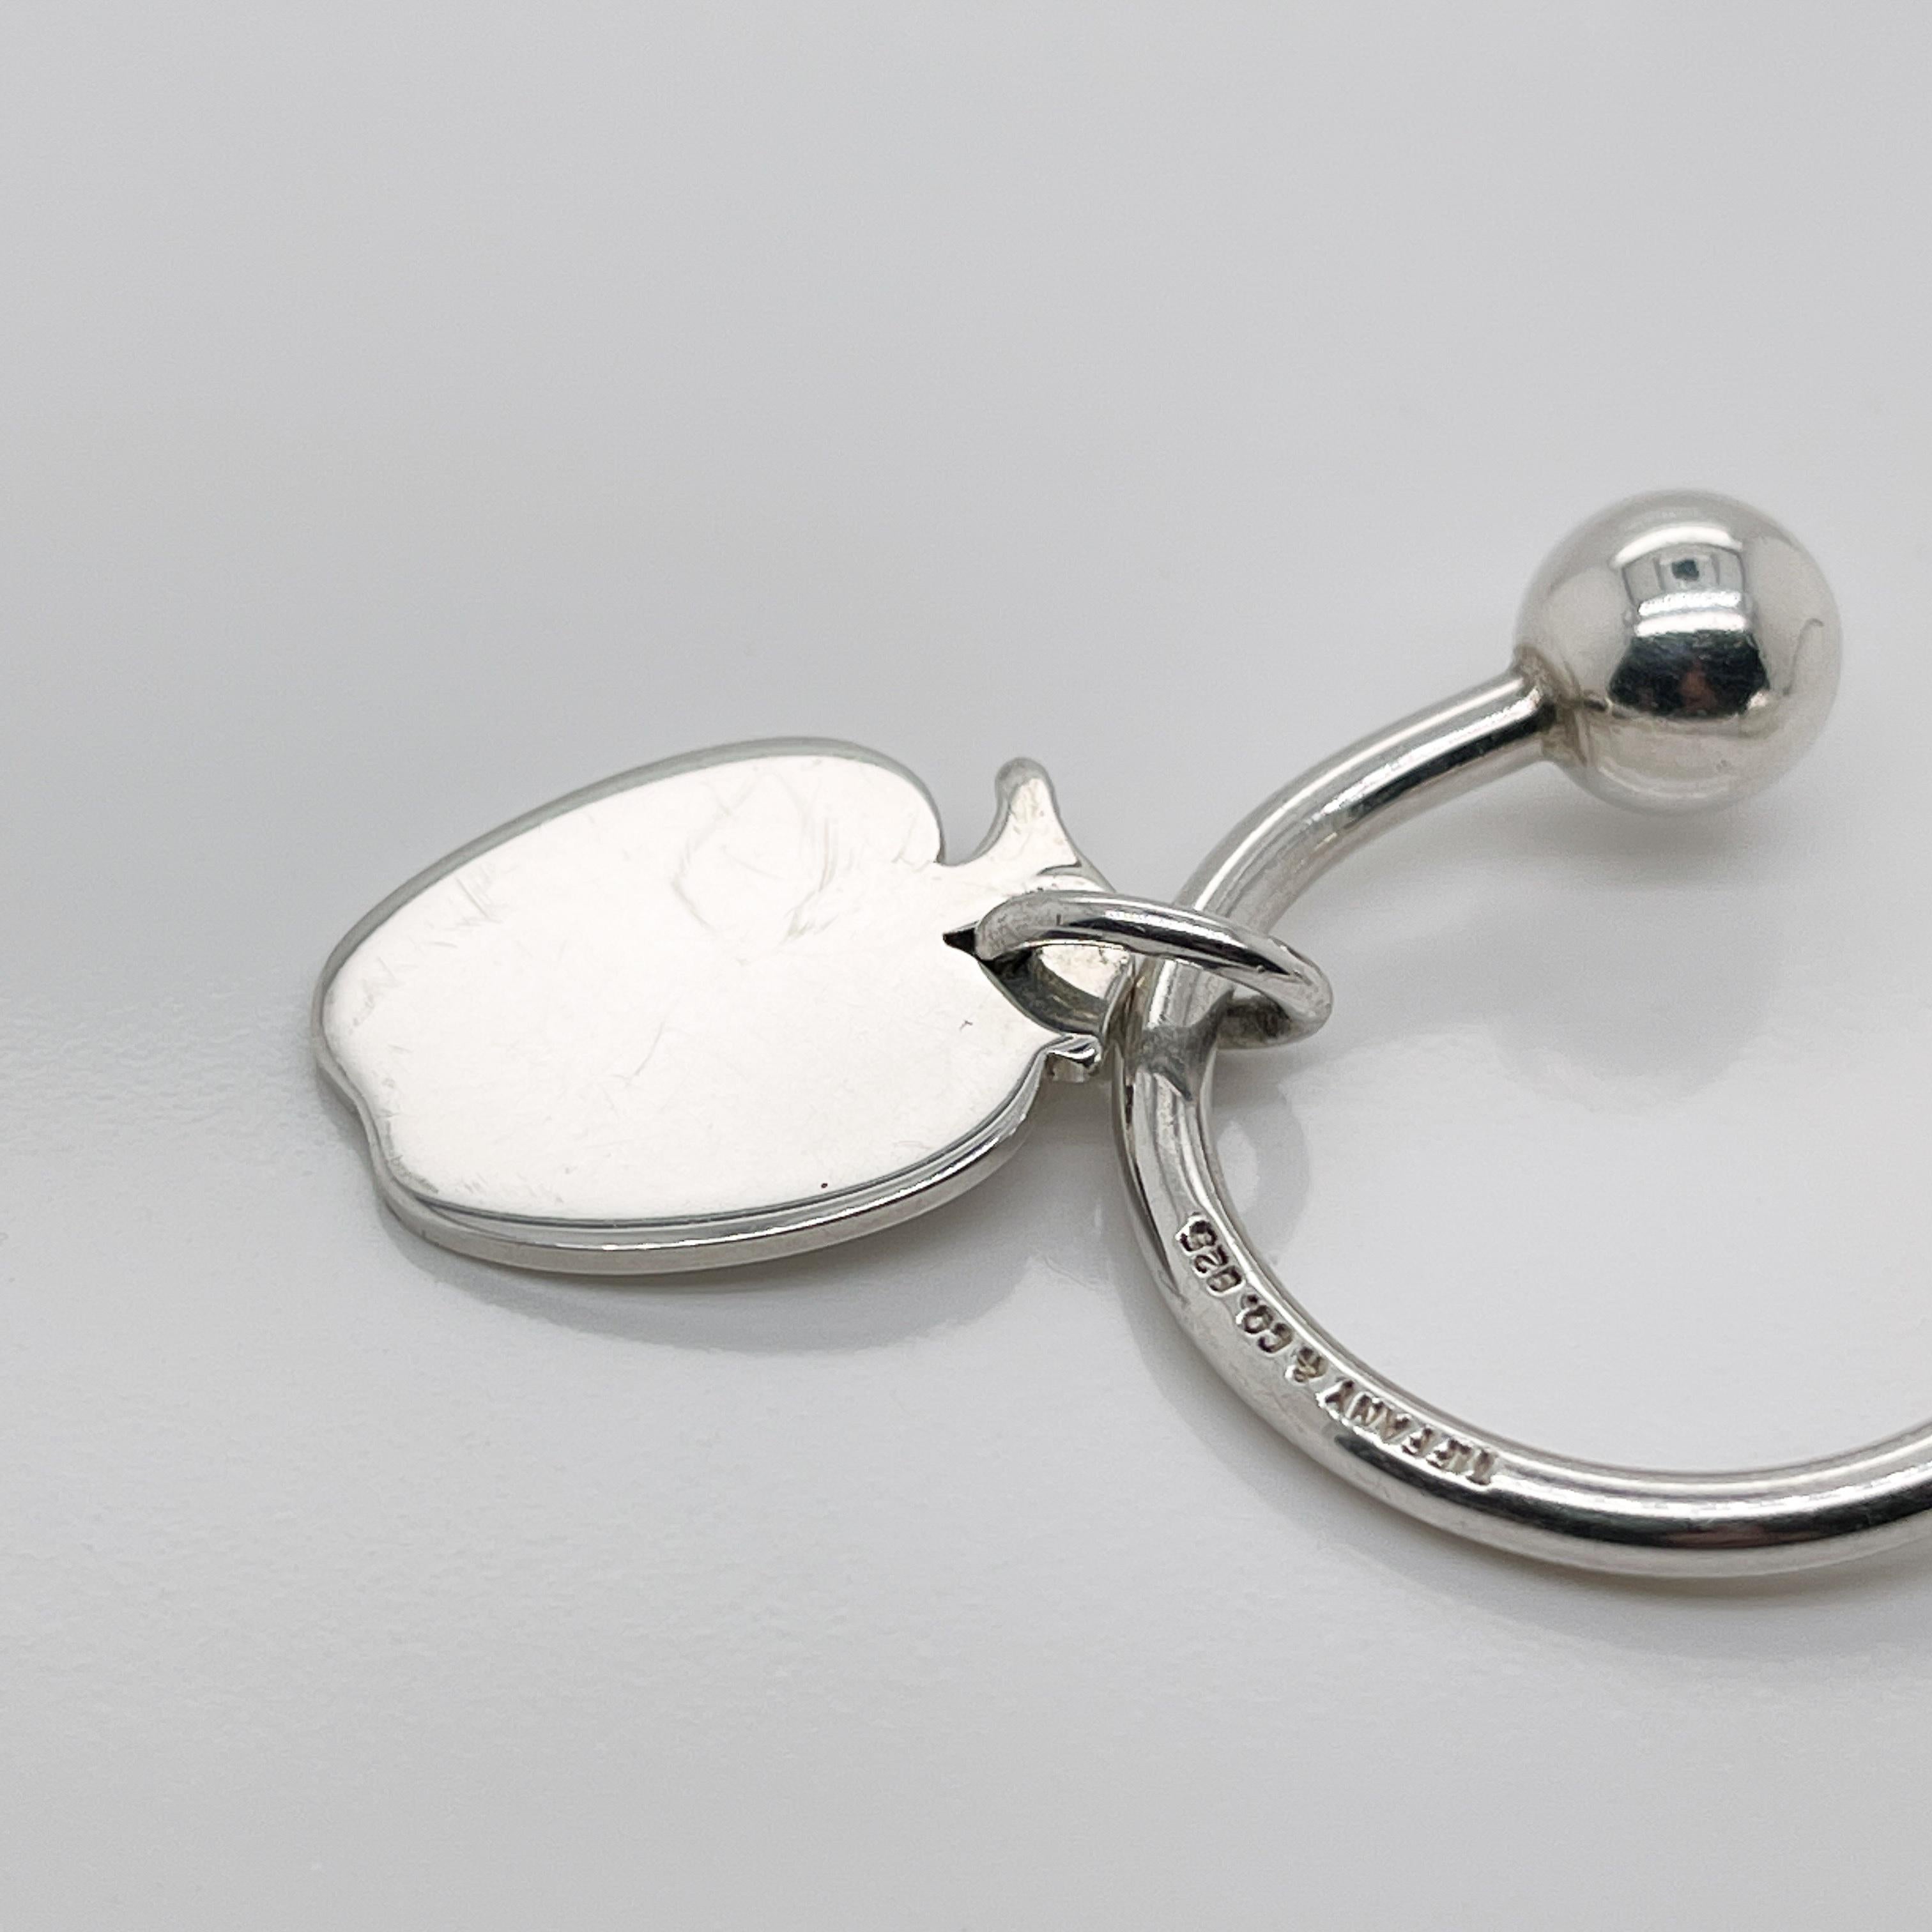 Vintage Tiffany & Co. Sterling Silver Figural Apple Key Holder or Key Chain In Good Condition For Sale In Philadelphia, PA